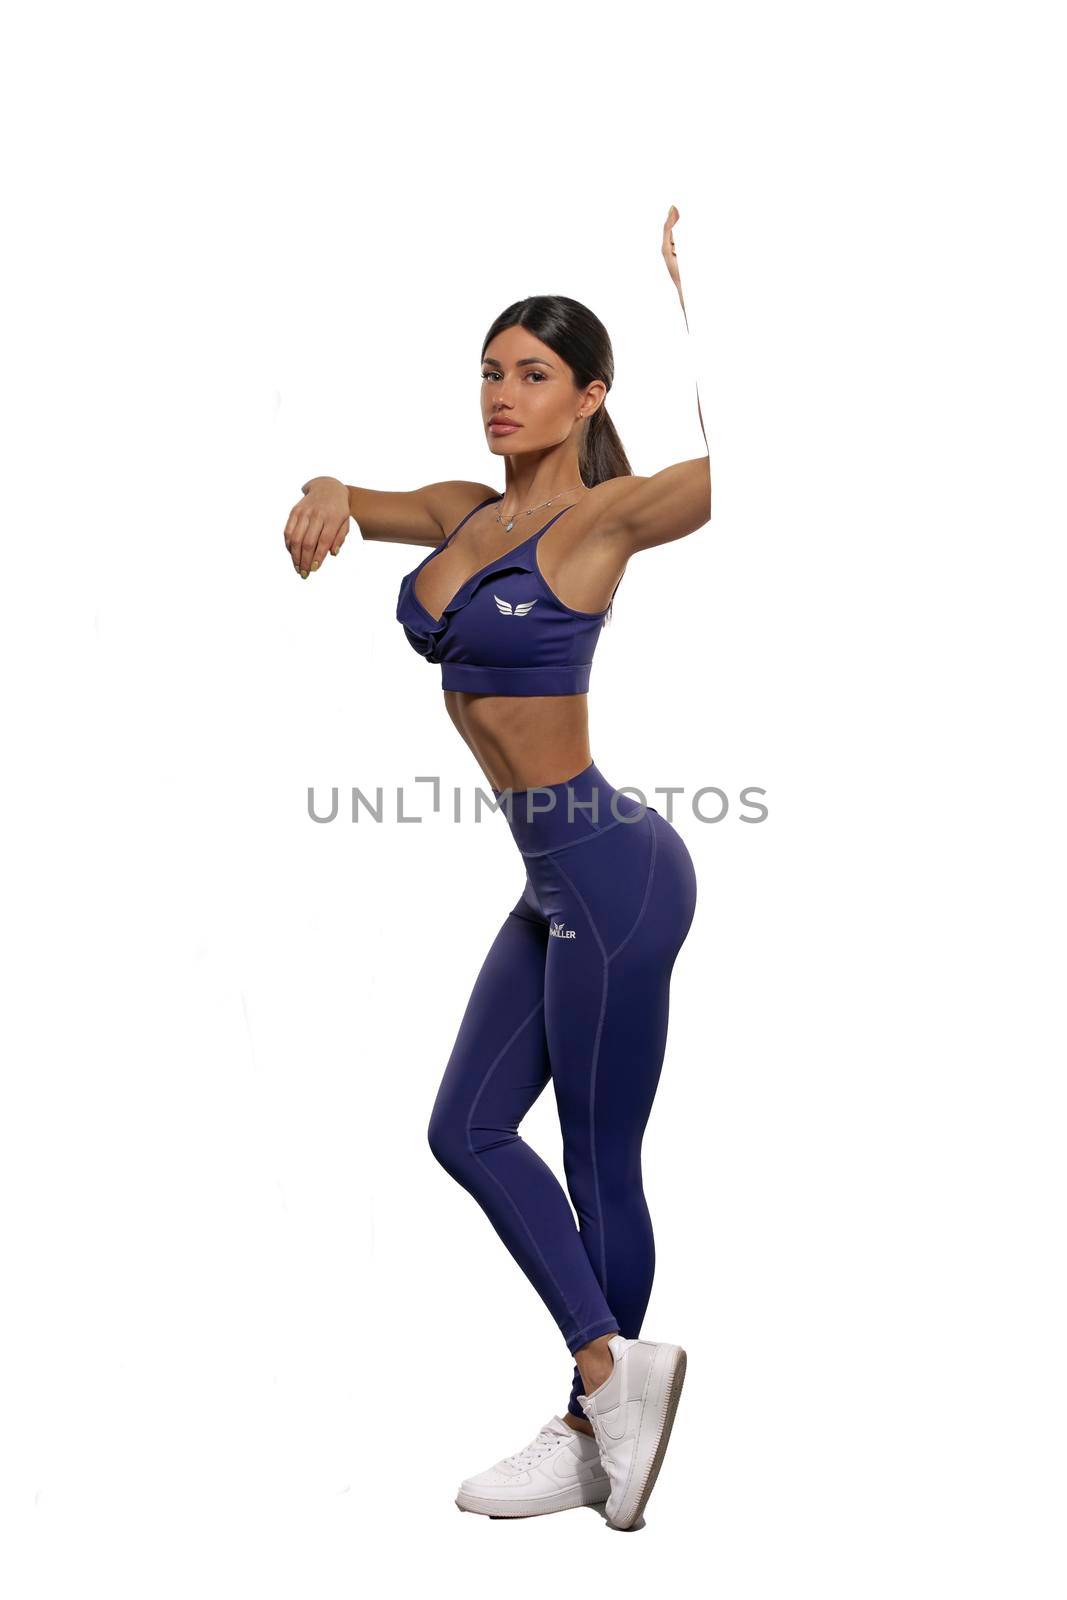 brunette girl in blue leggings and top on a white background